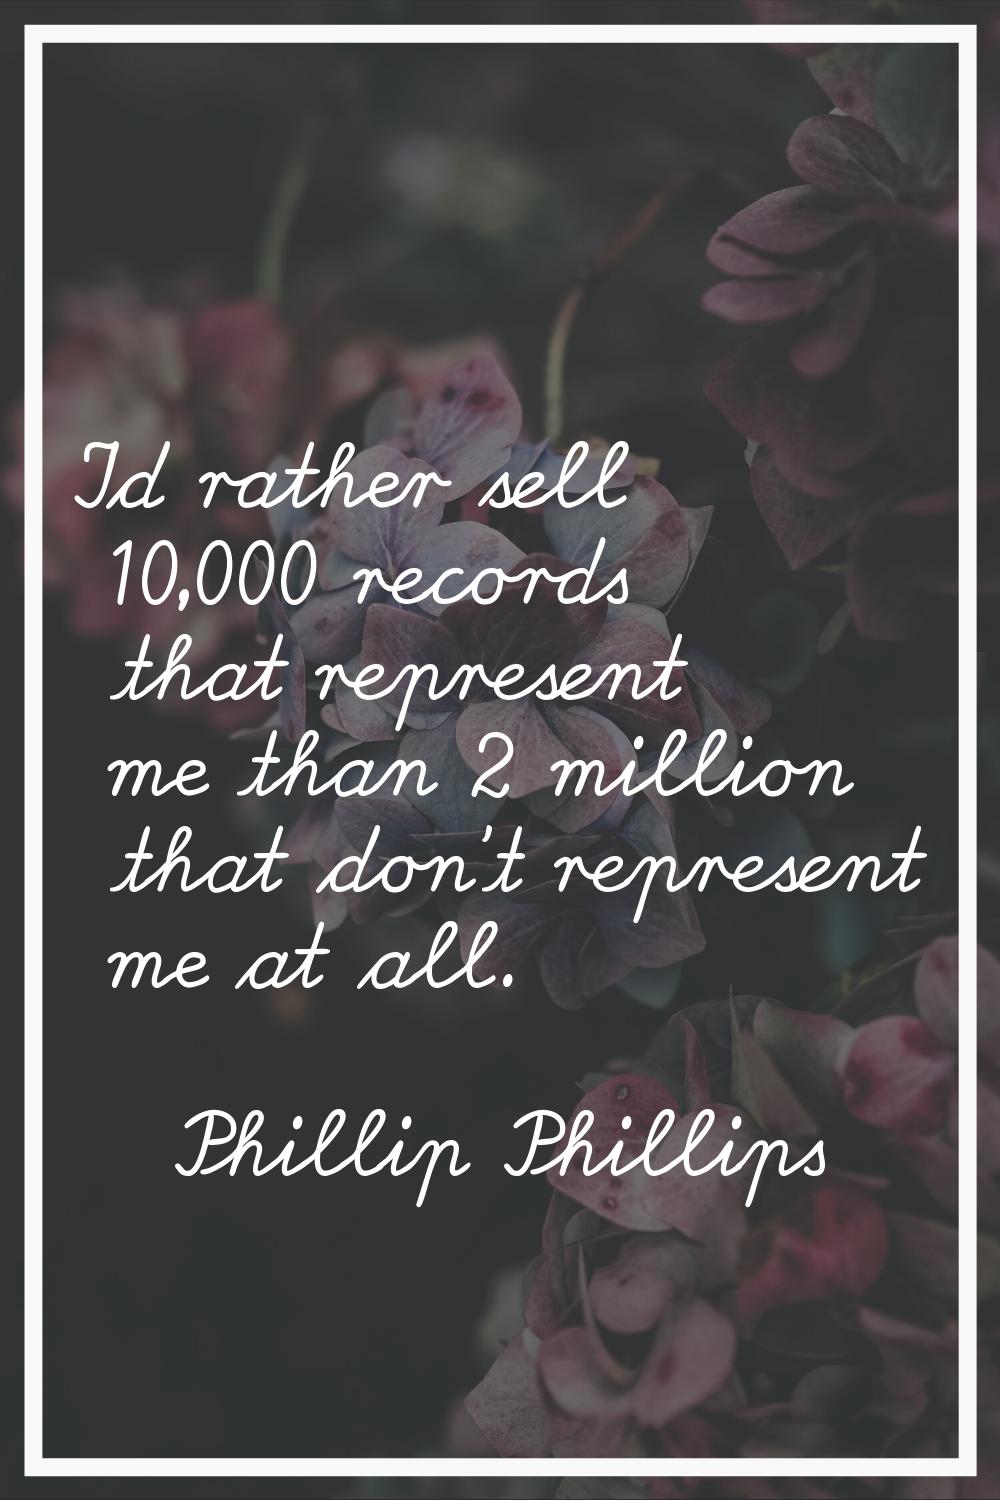 I'd rather sell 10,000 records that represent me than 2 million that don't represent me at all.